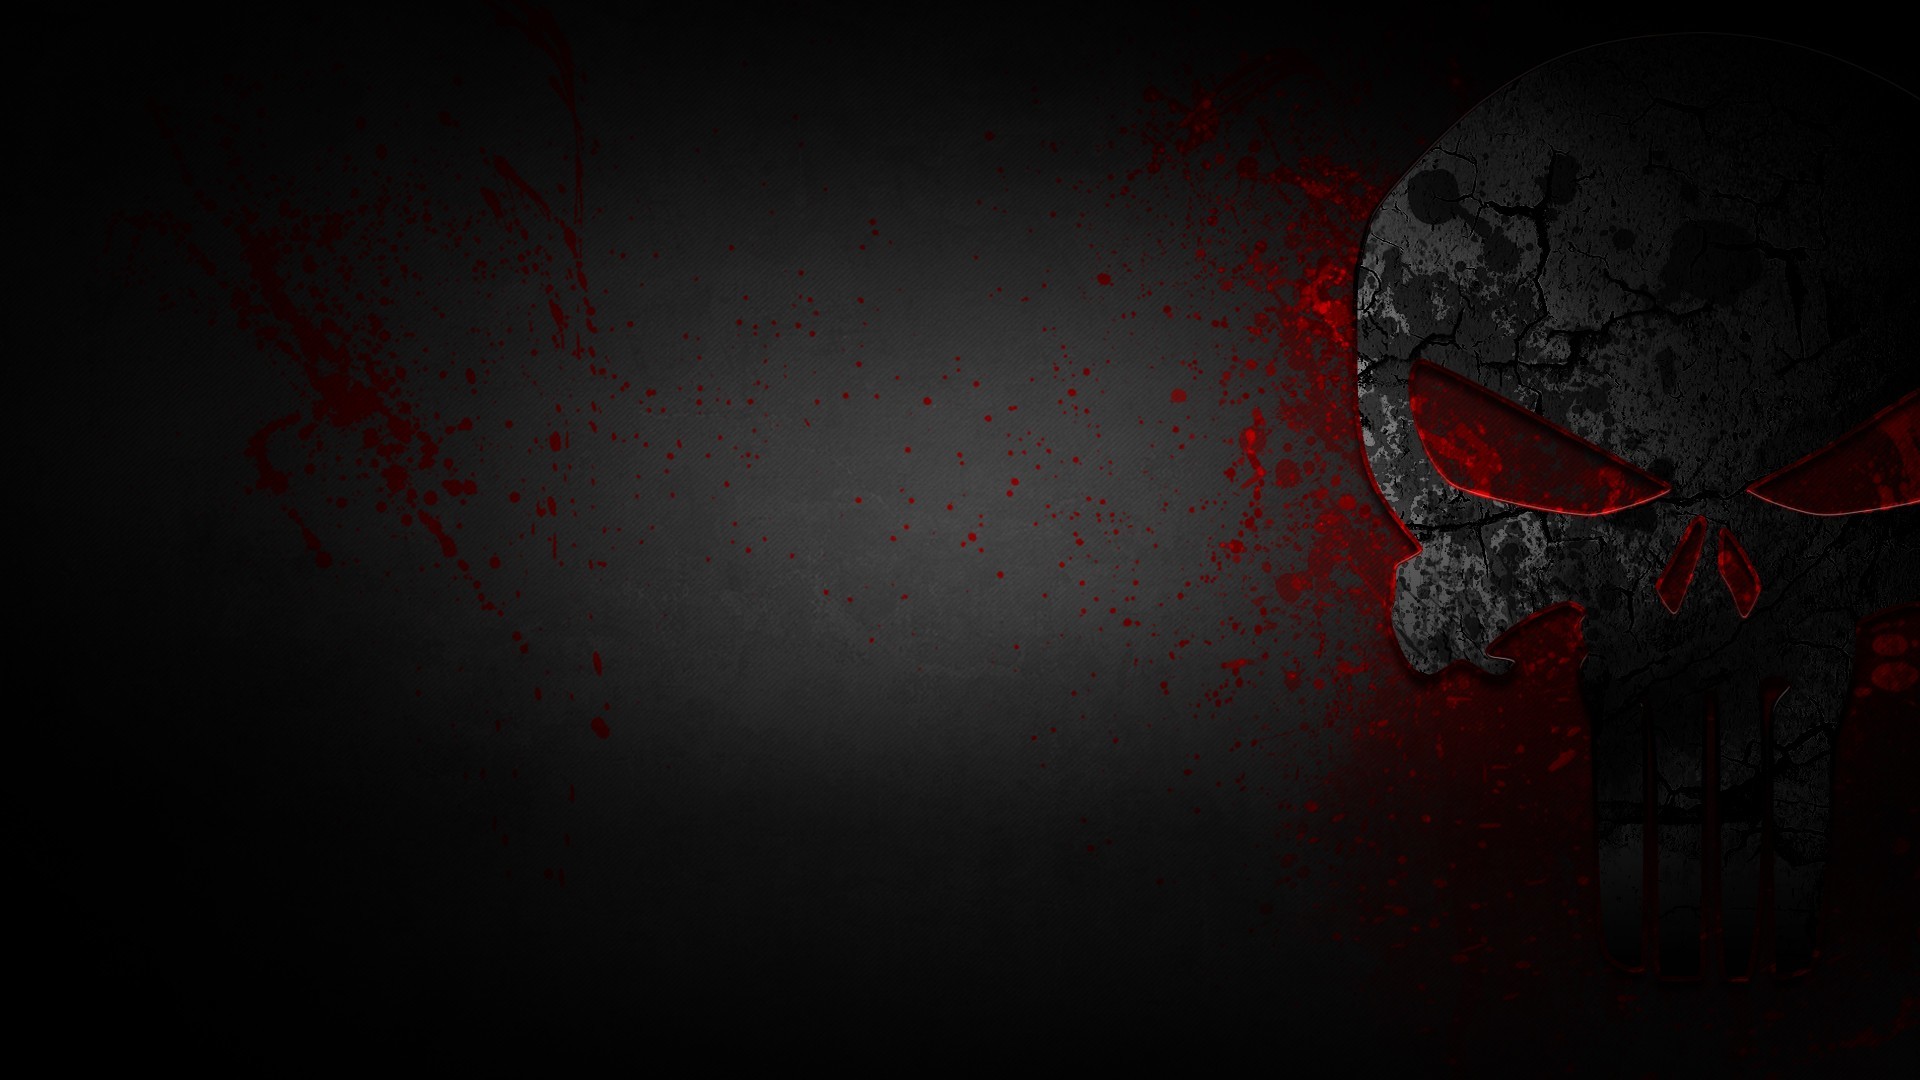 1920x1080 The Punisher HD Wallpapers Backgrounds Wallpaper 1920Ã1080 Punisher  Backgrounds (37 Wallpapers) |